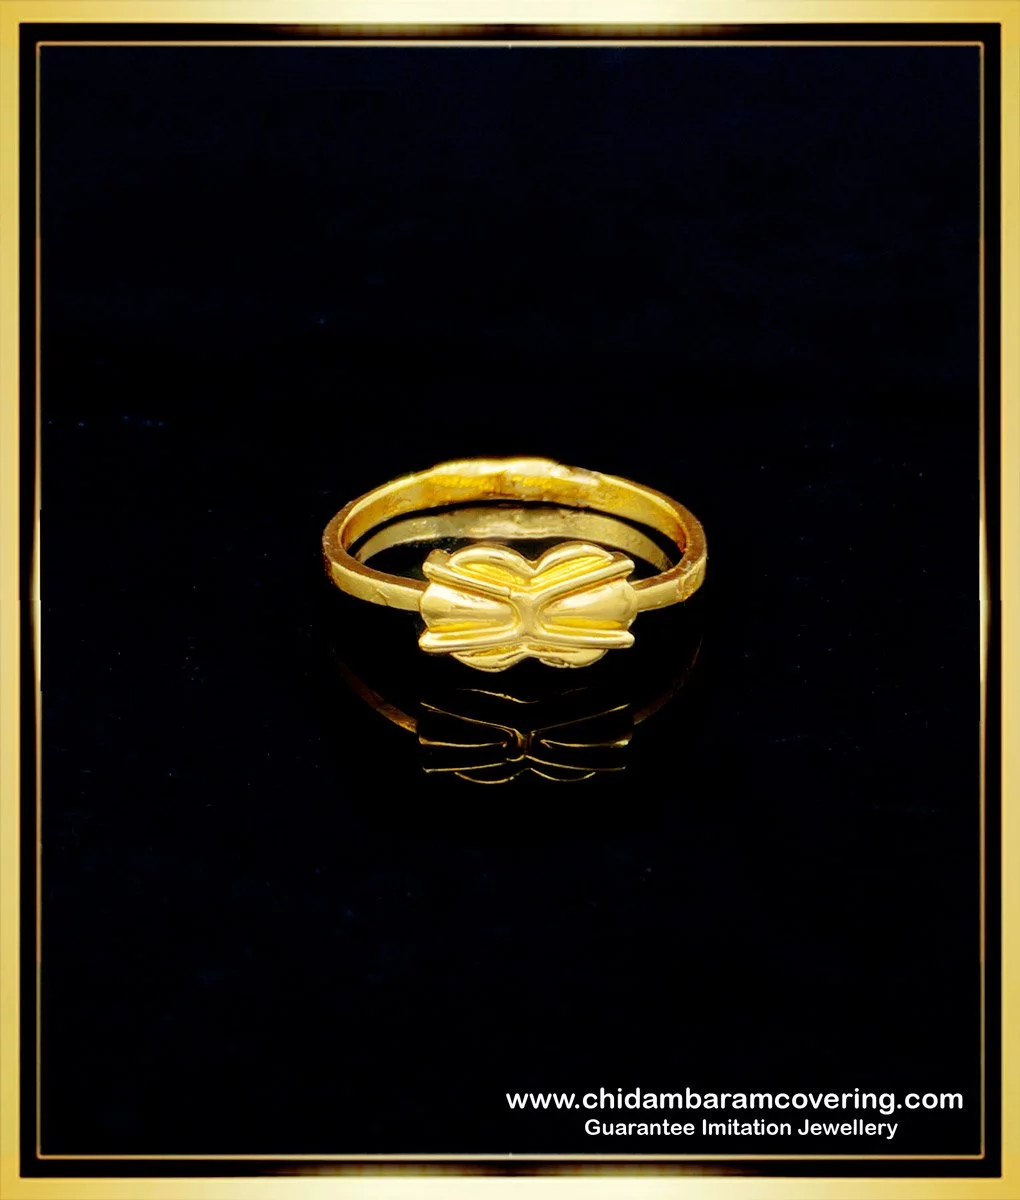 Ka Gold Jewelry - Vesica Piscis Ring The structure in the... | Facebook